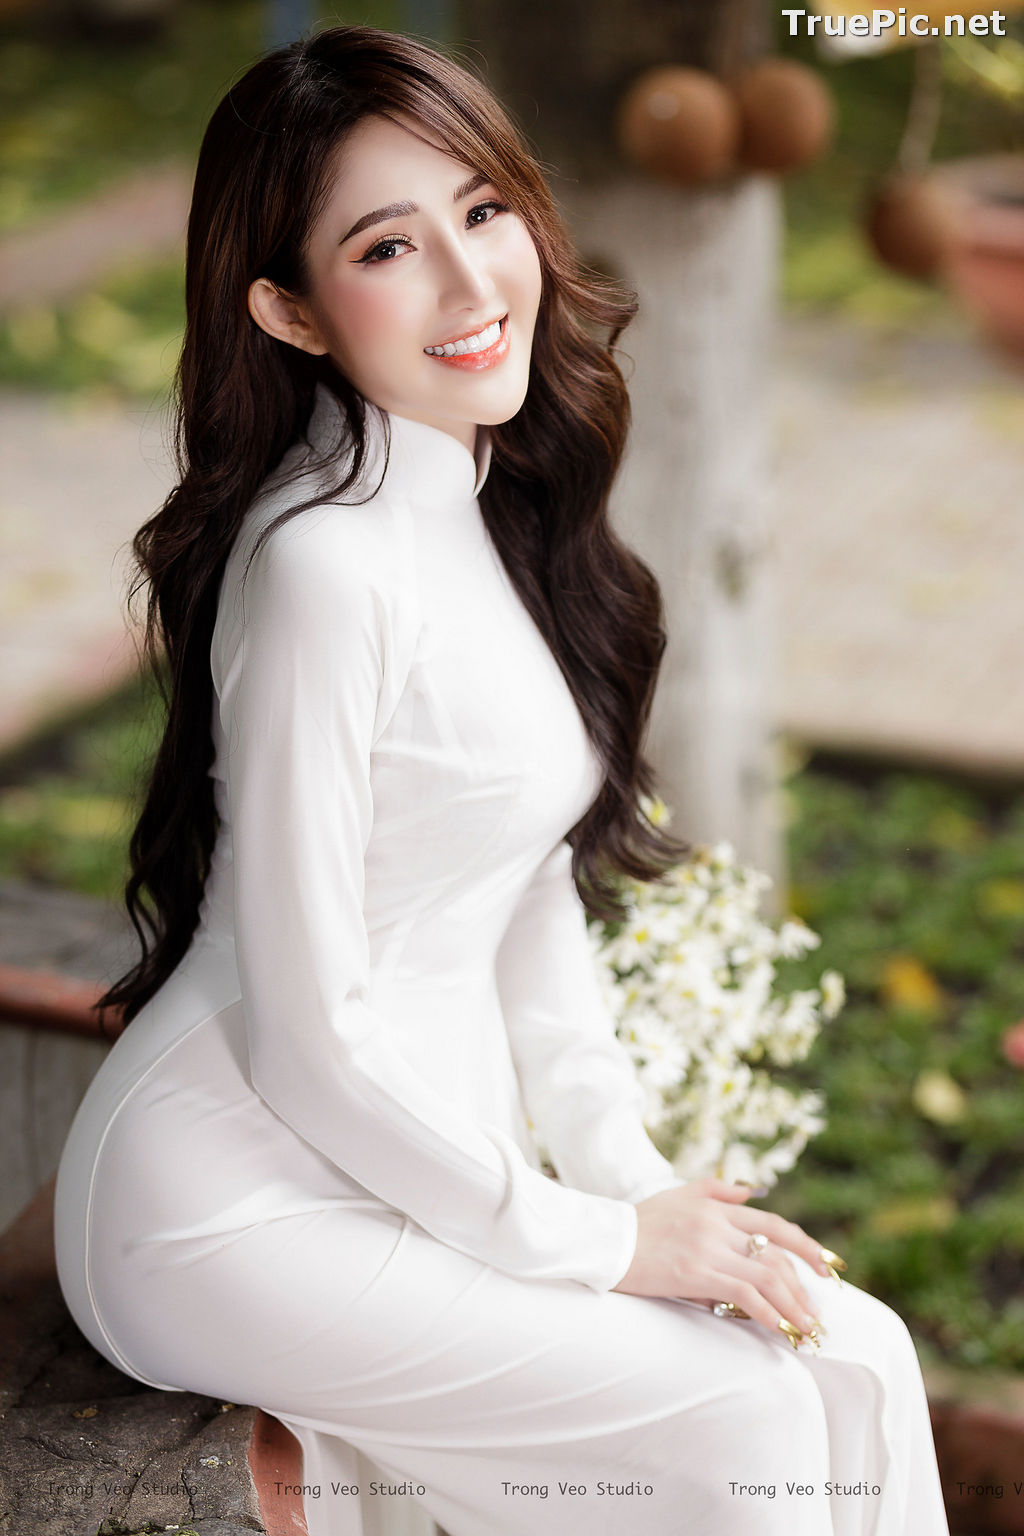 Image The Beauty of Vietnamese Girls with Traditional Dress (Ao Dai) #3 - TruePic.net - Picture-20